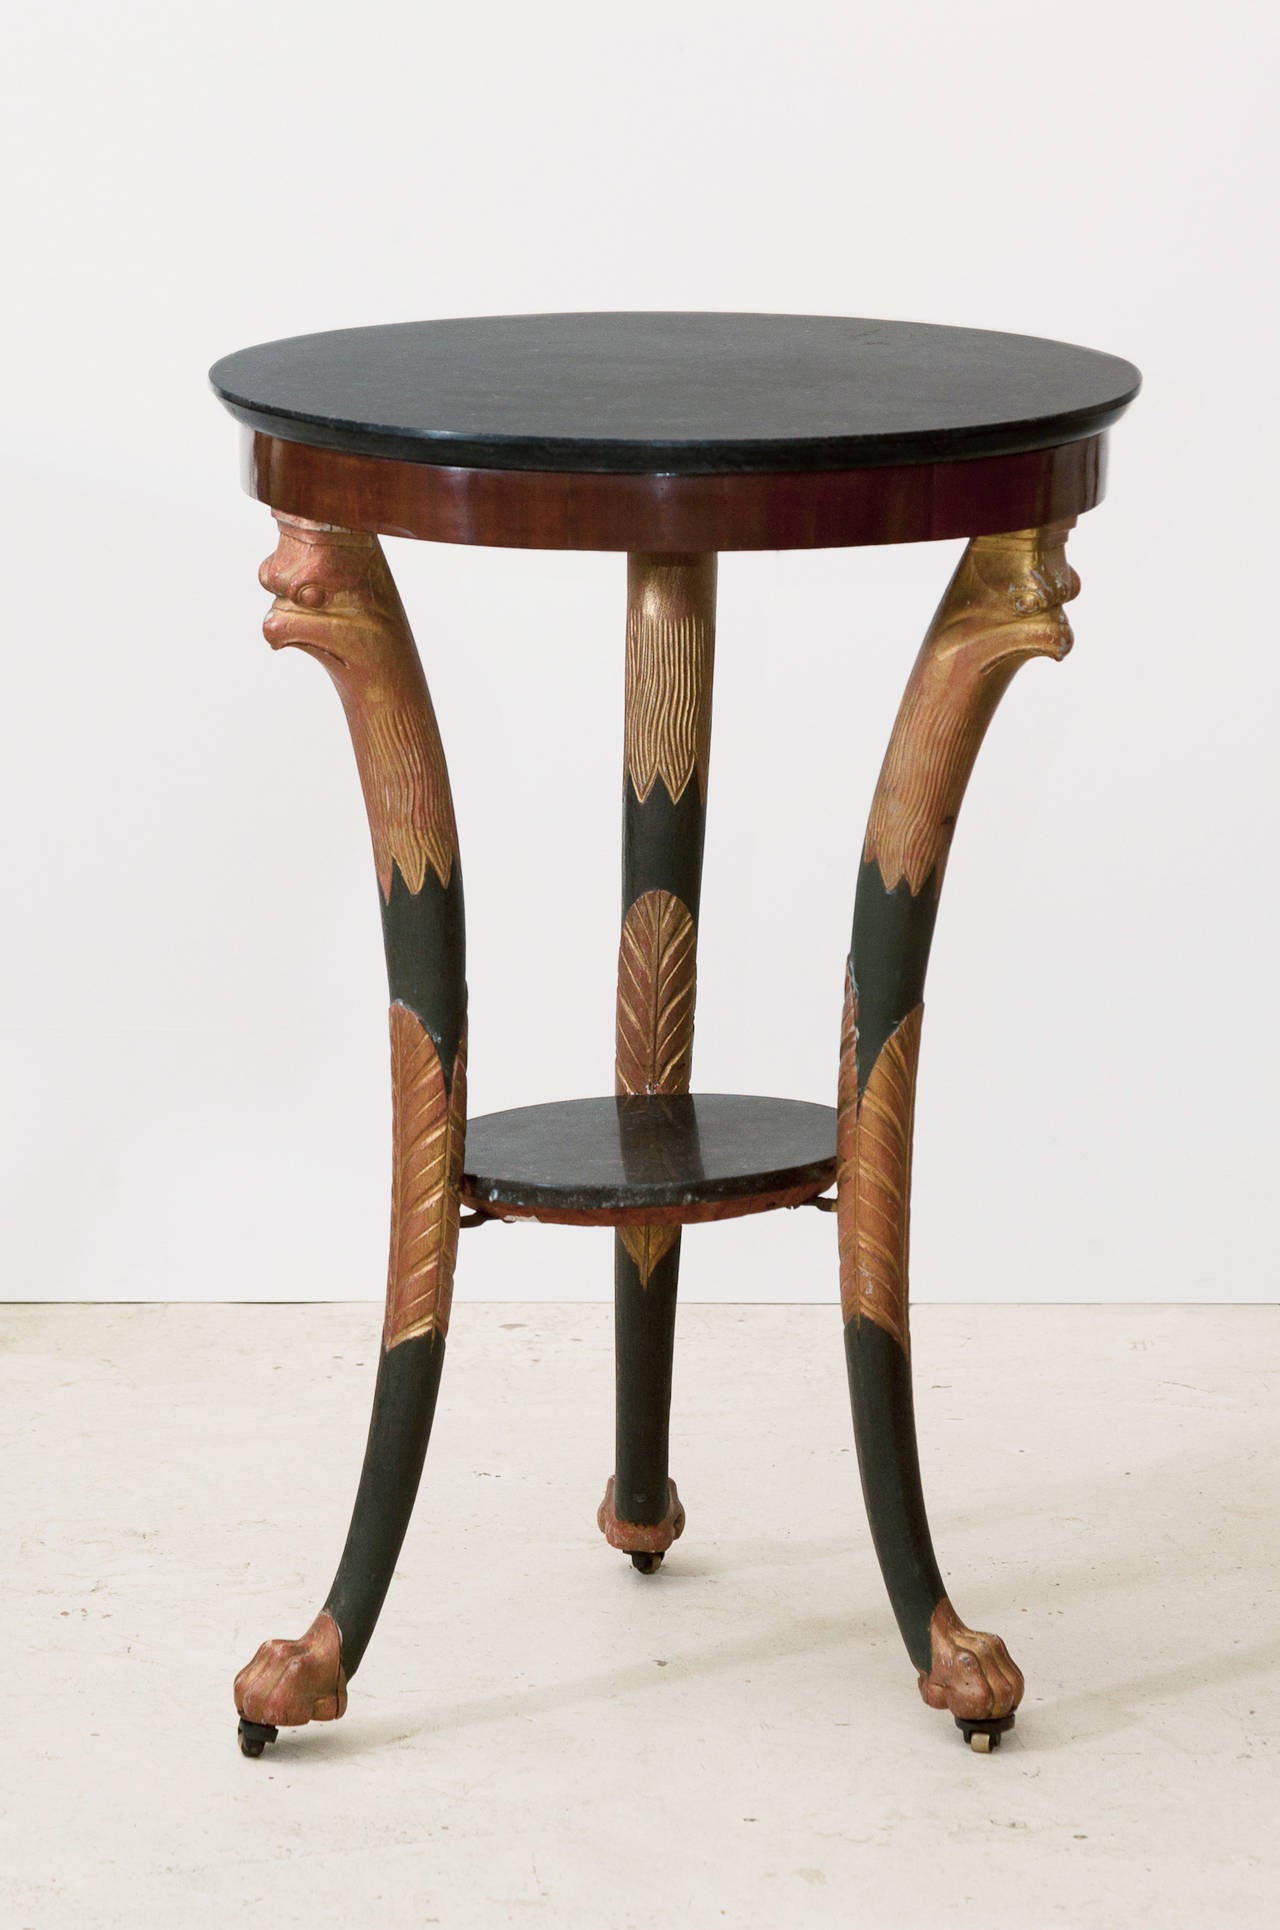 Standing on three legs partly gilt and painted to resemble bronze. Matt black fossil marble top. The tops of the legs with carved falcon heads in the Egyptian taste, supports joined by a circular undertier with matt black fossil marble insert